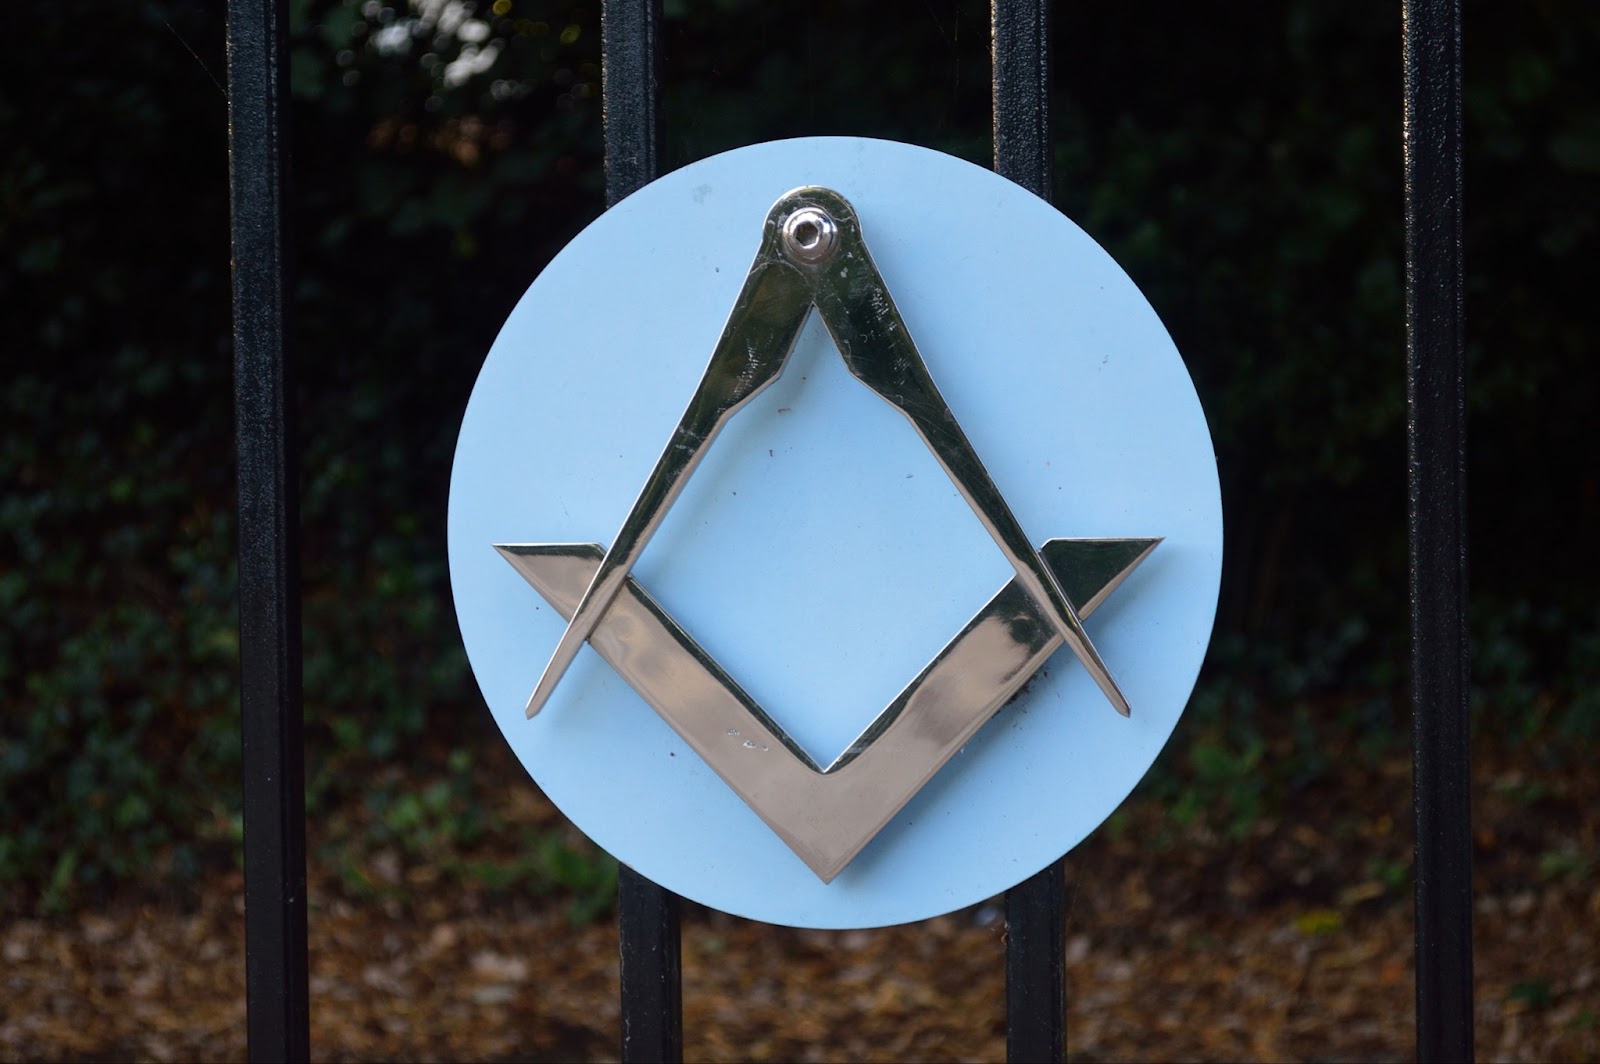 Square and compasses emblem on the gate of Freemasons Hall, England